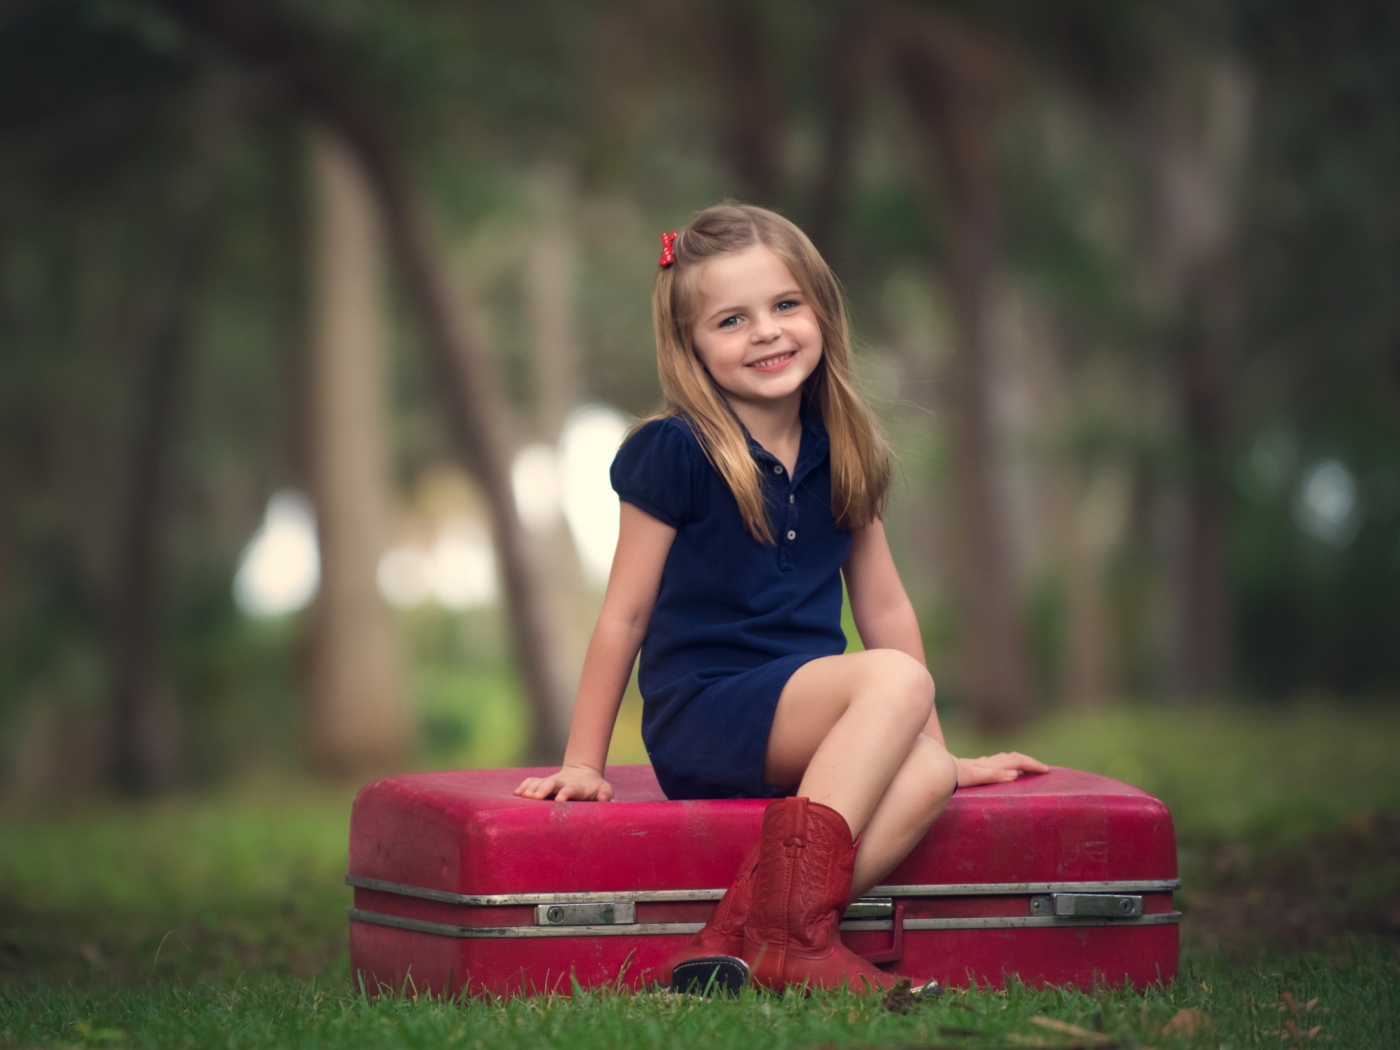 Обои Little Girl Sitting On Red Suitcase 1400x1050